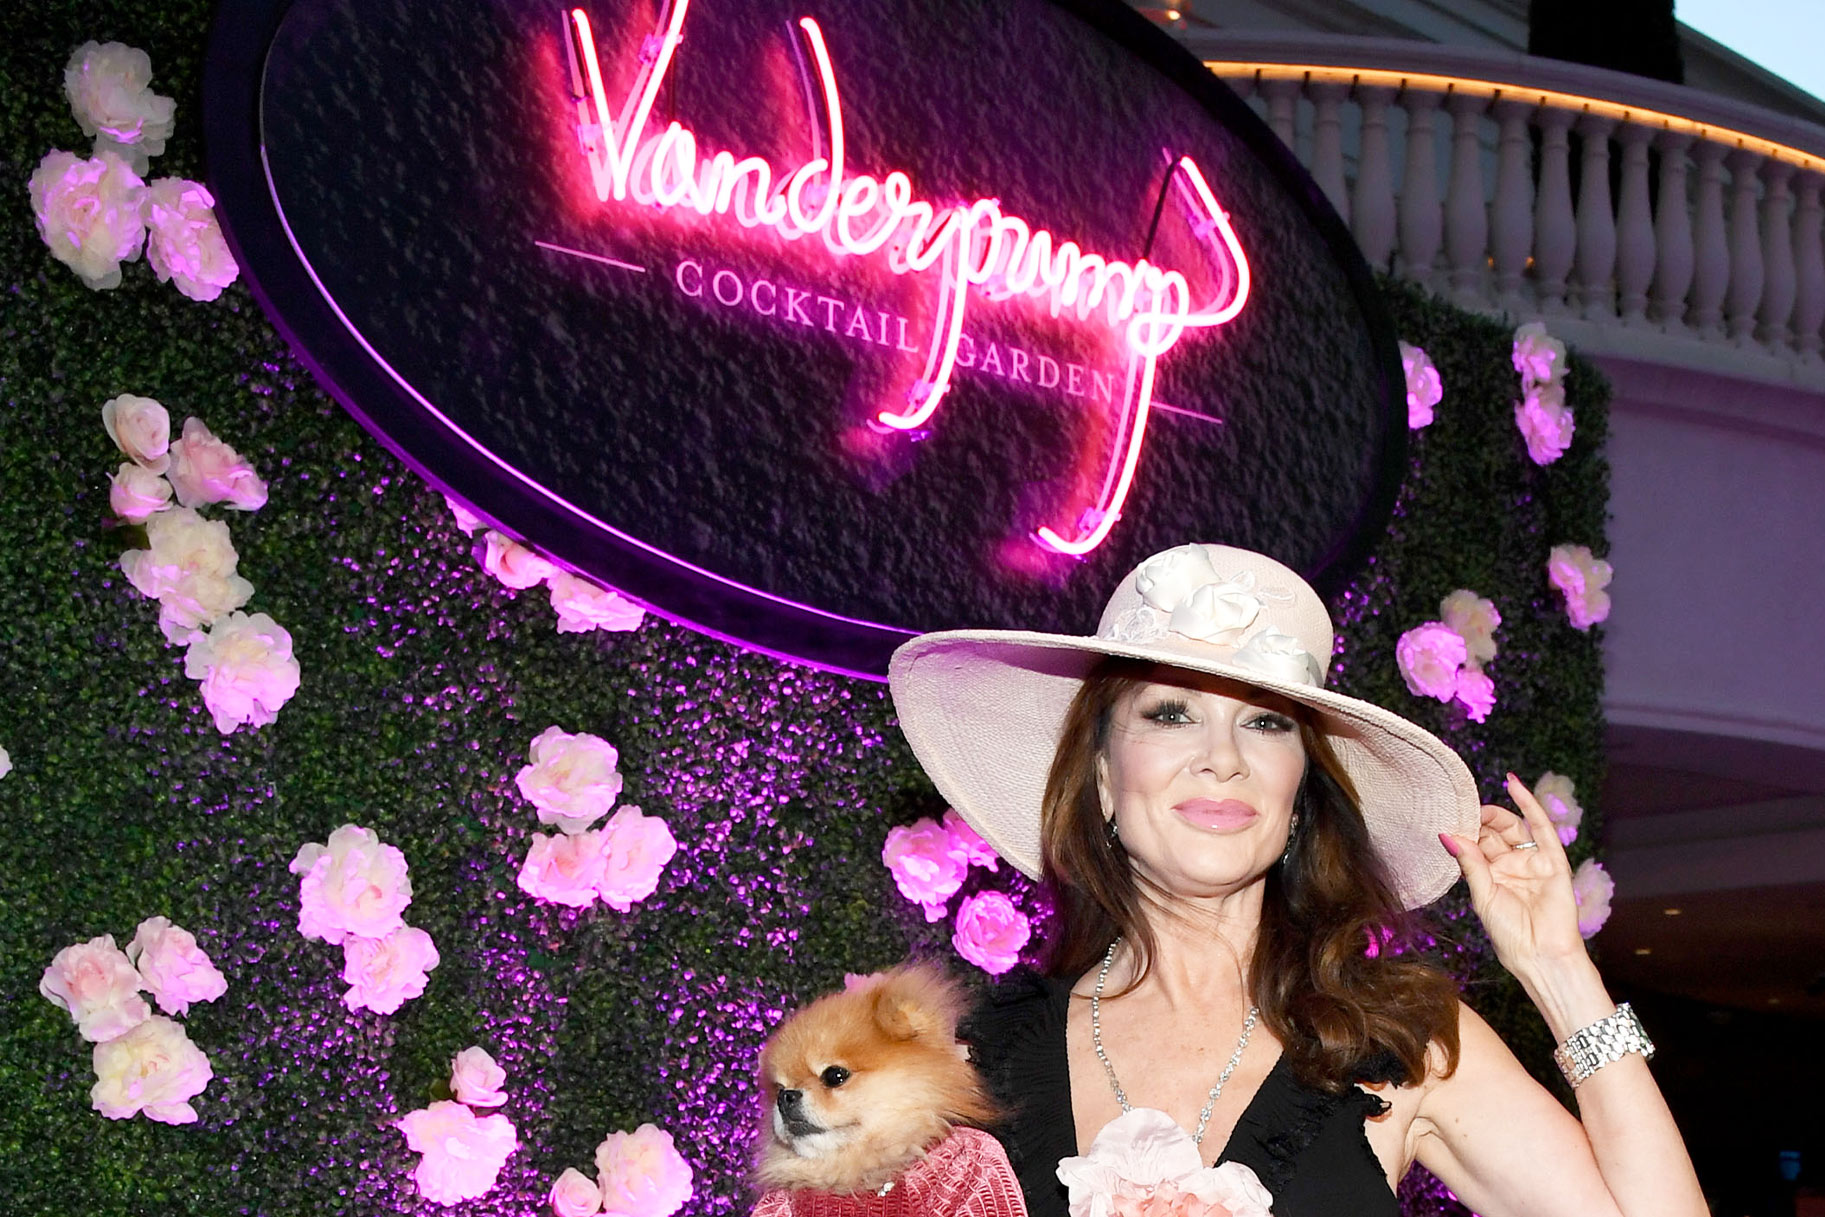 TELEVISION STAR AND RESTAURATEUR LISA VANDERPUMP HOSTED THE STAR-STUDDED  GRAND